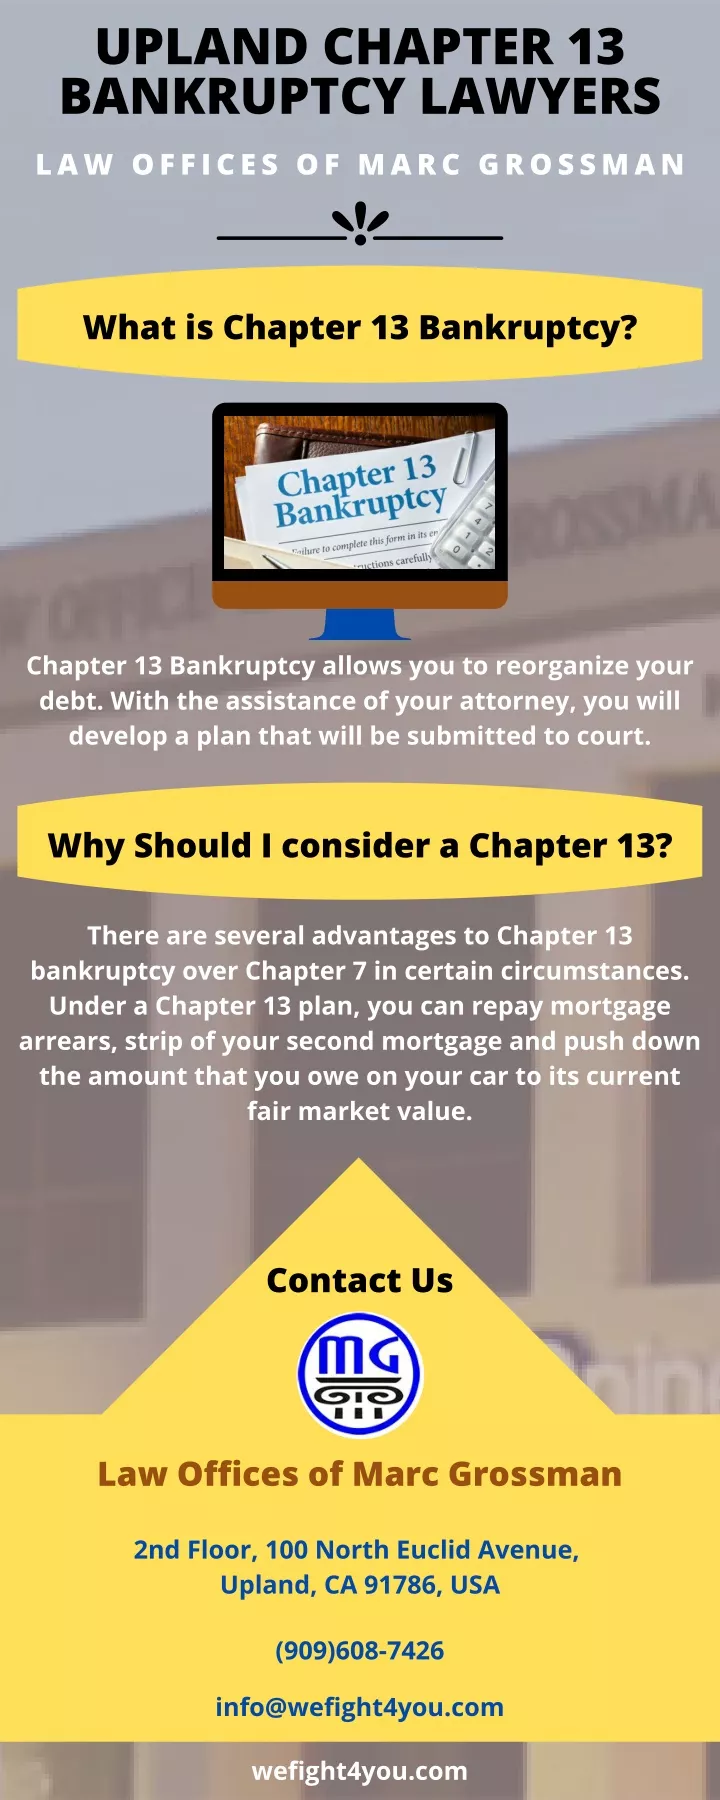 upland chapter 13 bankruptcy lawyers